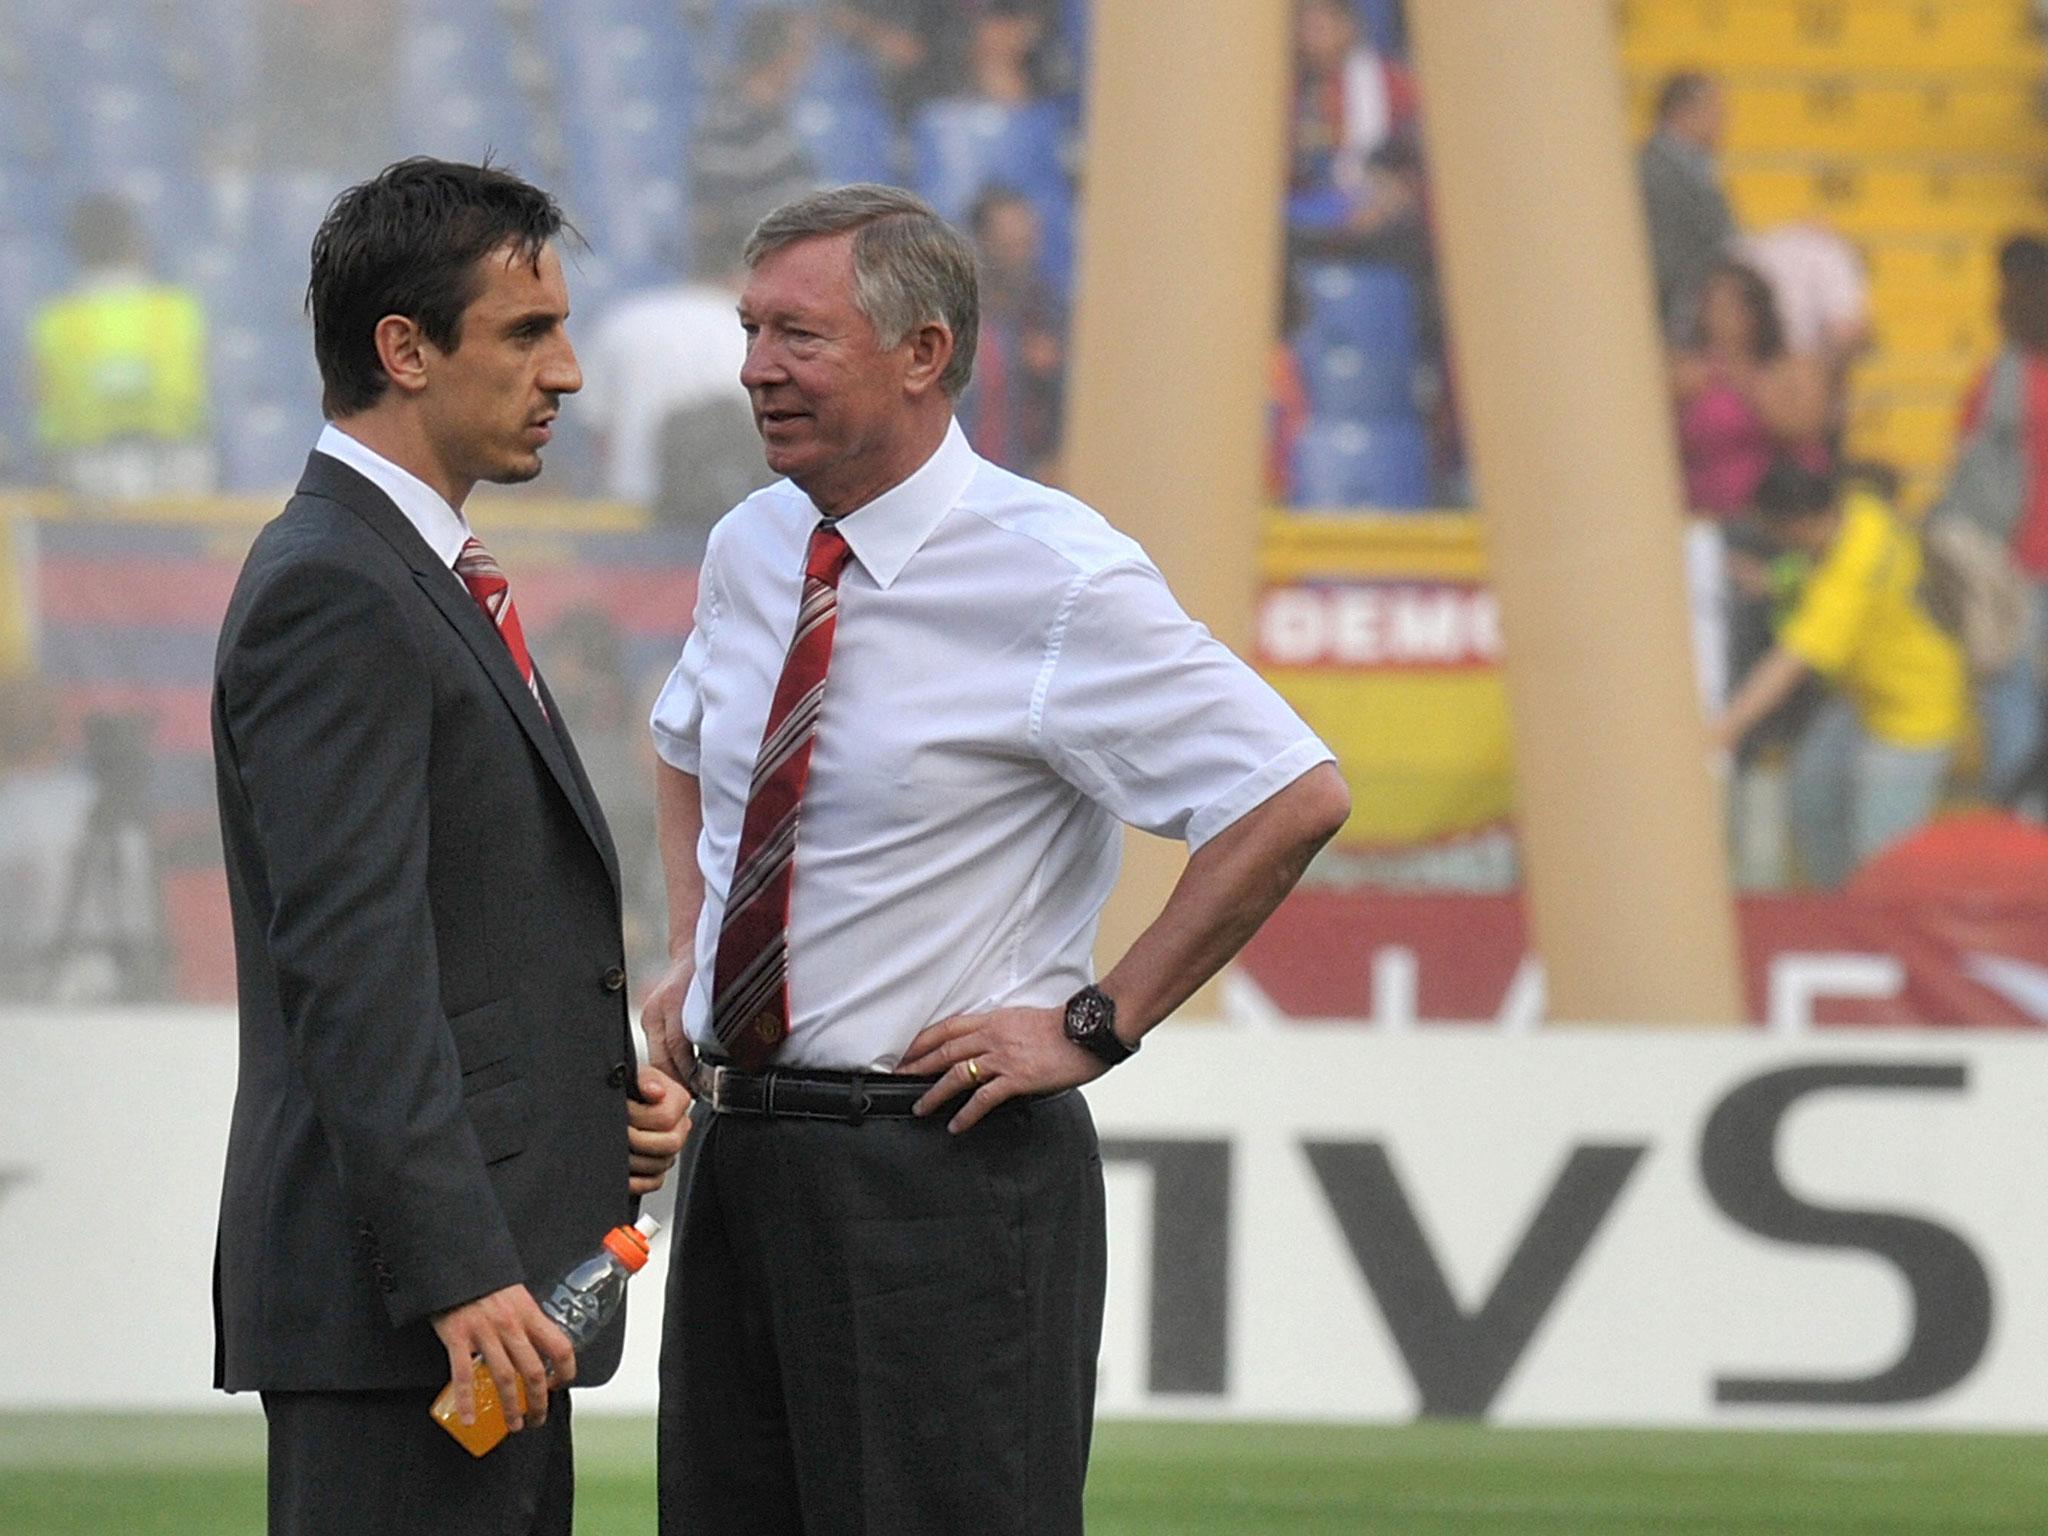 Gary Neville was subject to his fair share of Sir Alex Ferguson's tantrums